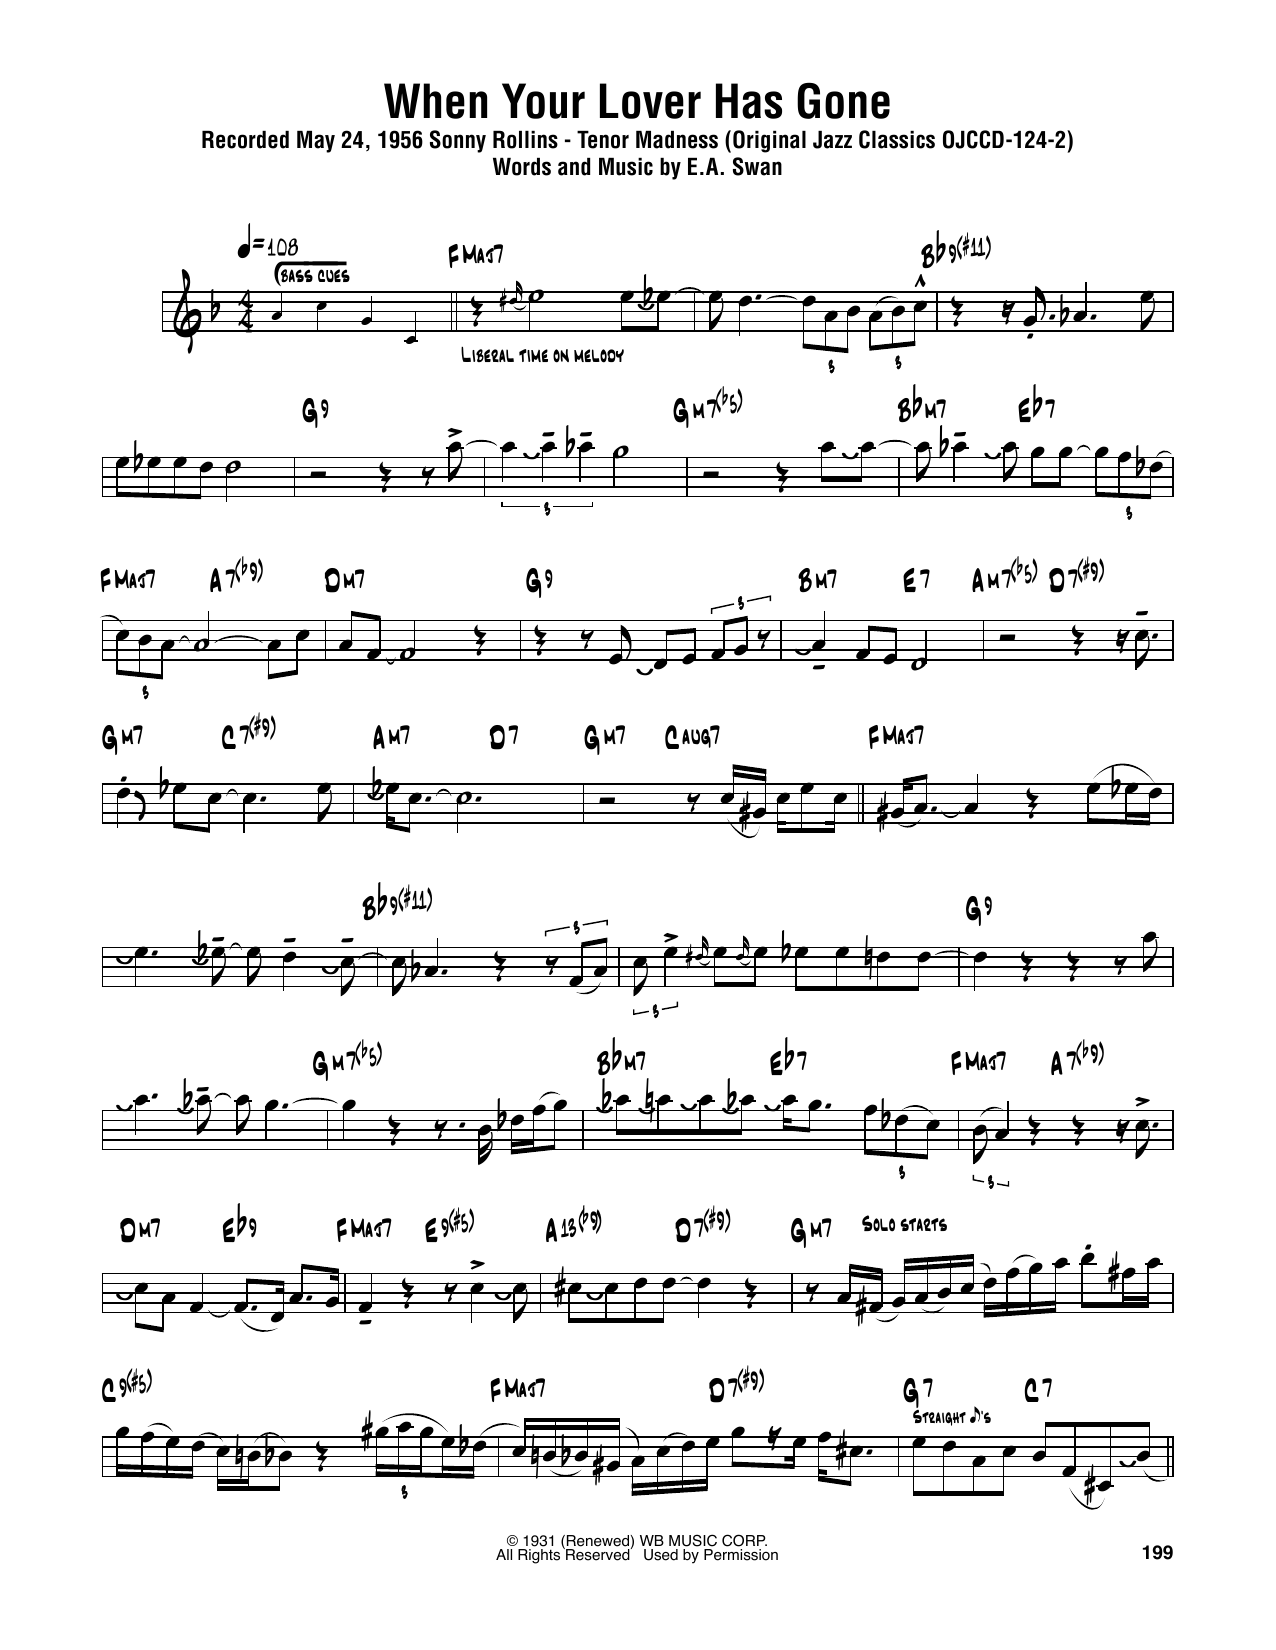 Download Sonny Rollins When Your Lover Has Gone Sheet Music